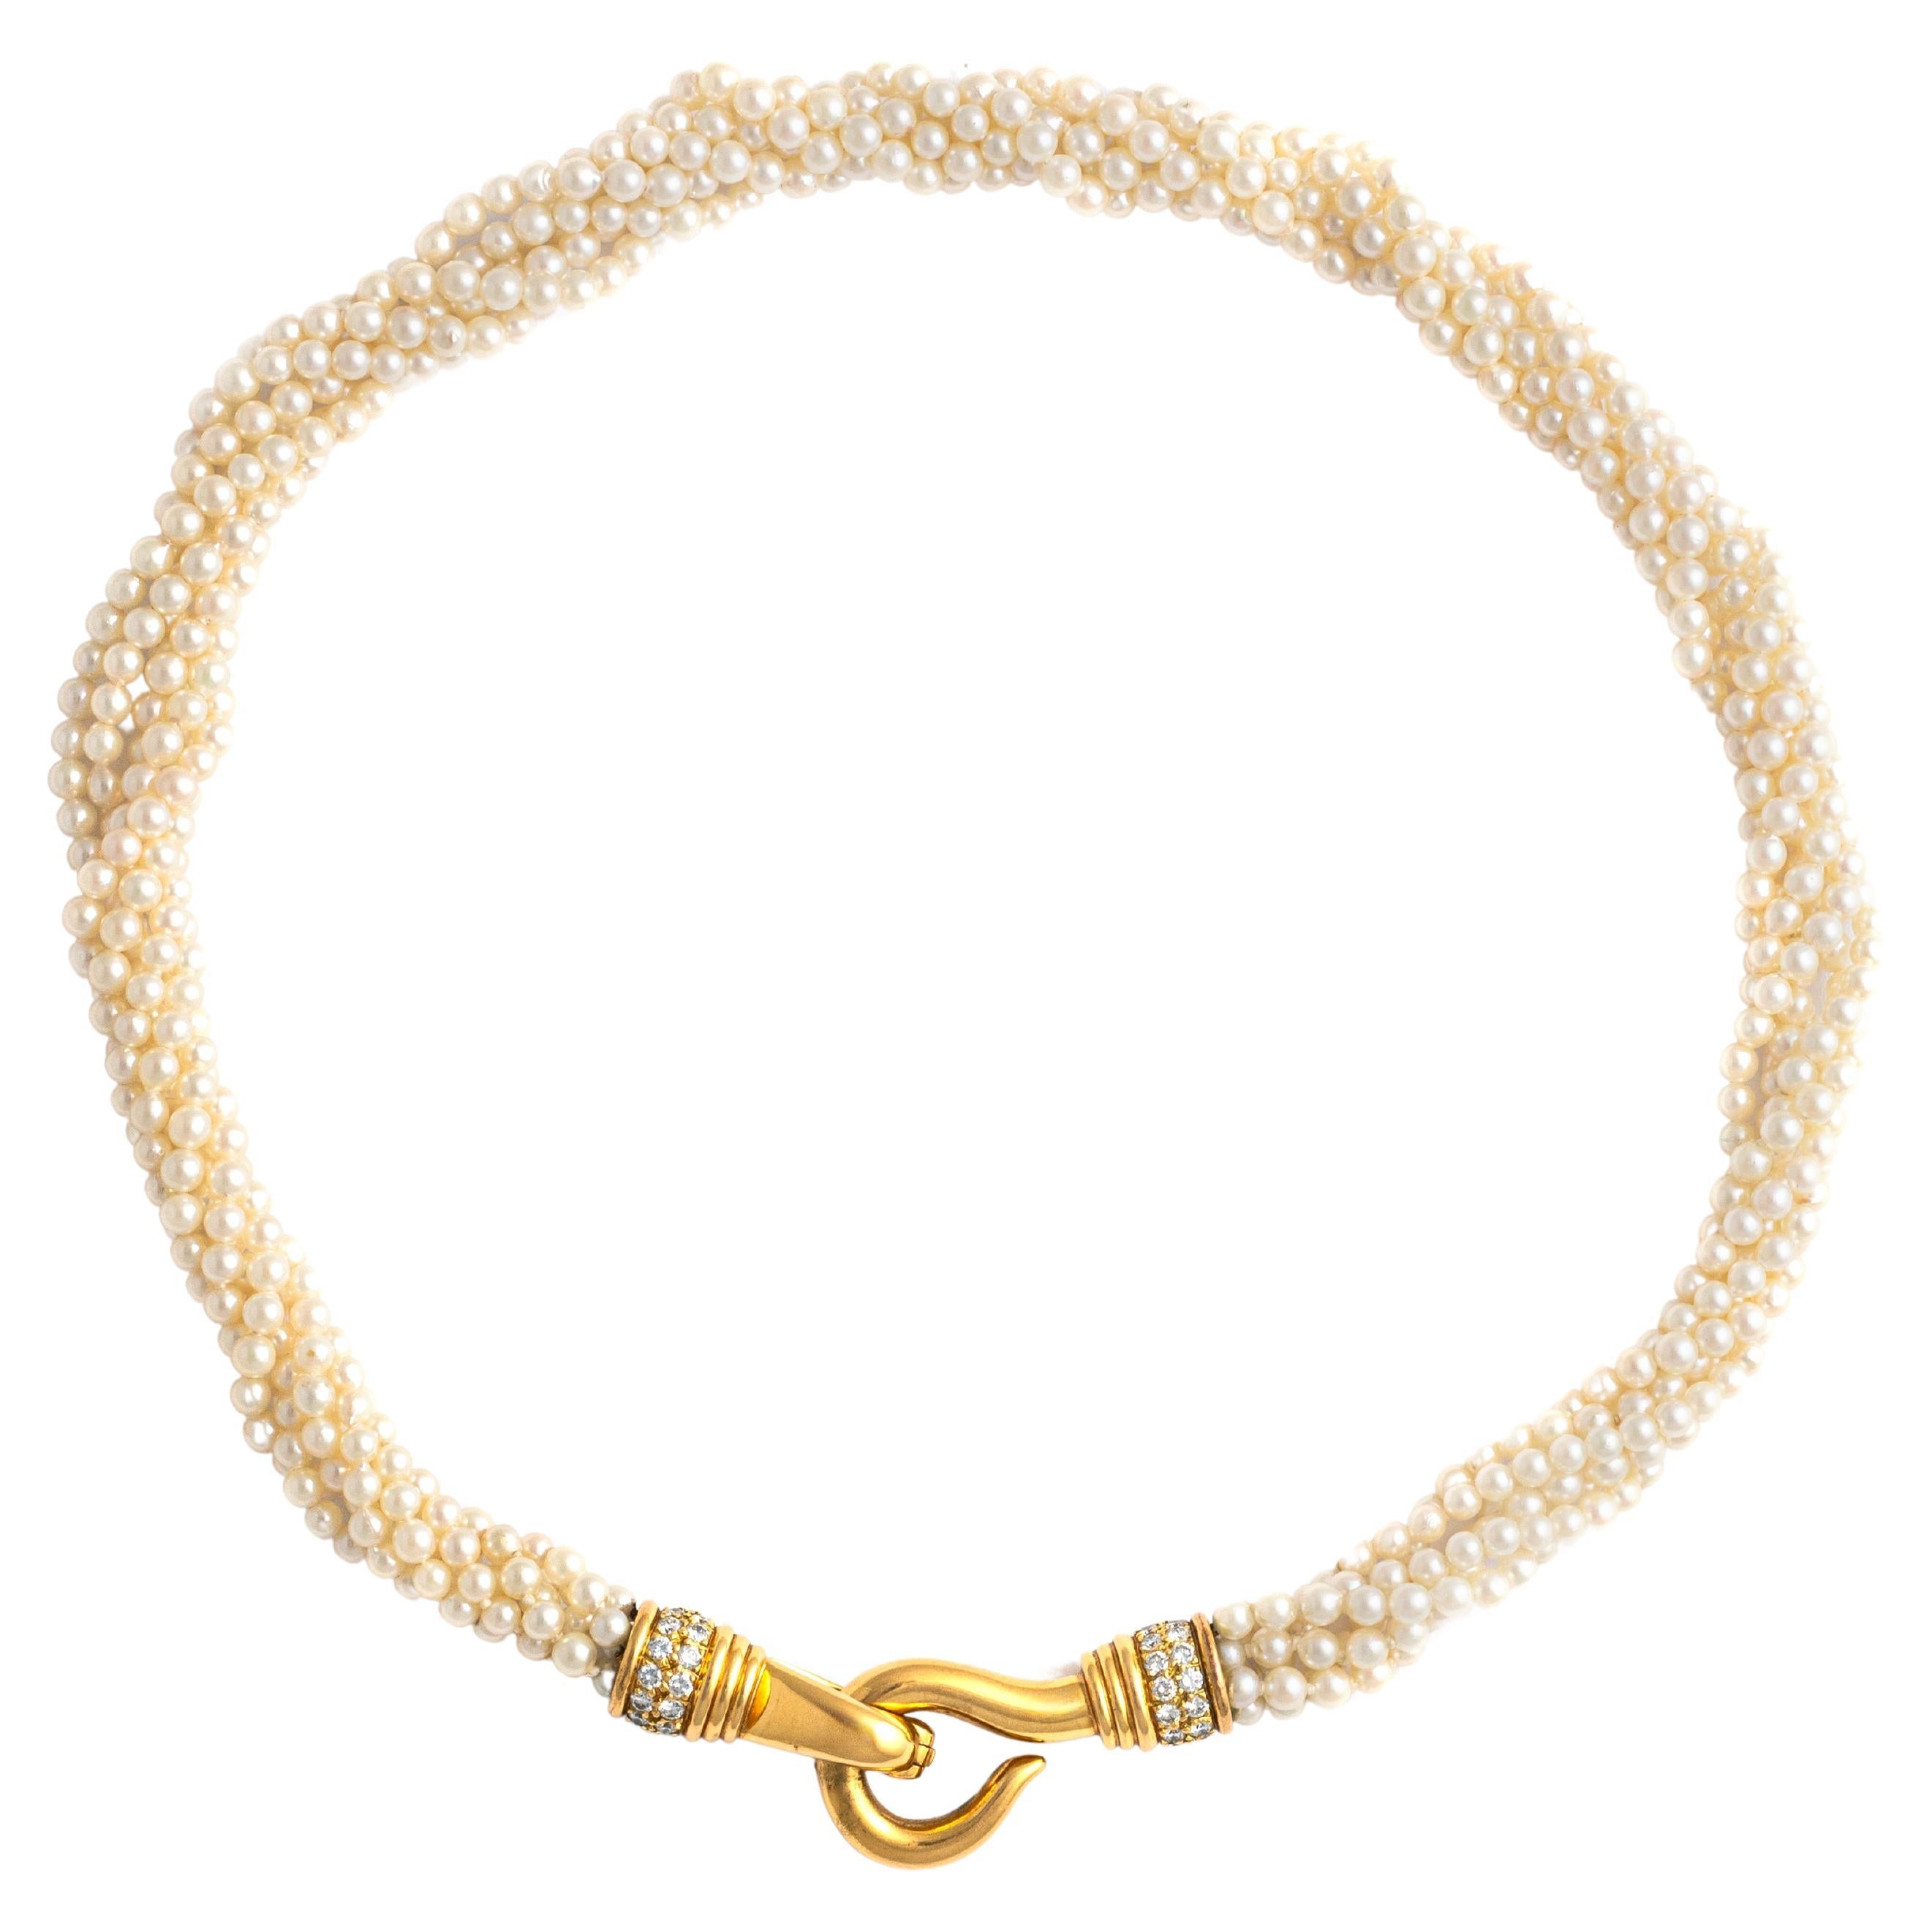 Cultured Pearl Necklace (6 strands of pearls) holding a Diamond Yellow Gold 18K clasp, set by 52 round cut diamonds H color and VS clarity. This statement piece boasts six strands of luminous cultured pearls, meticulously arranged to create a